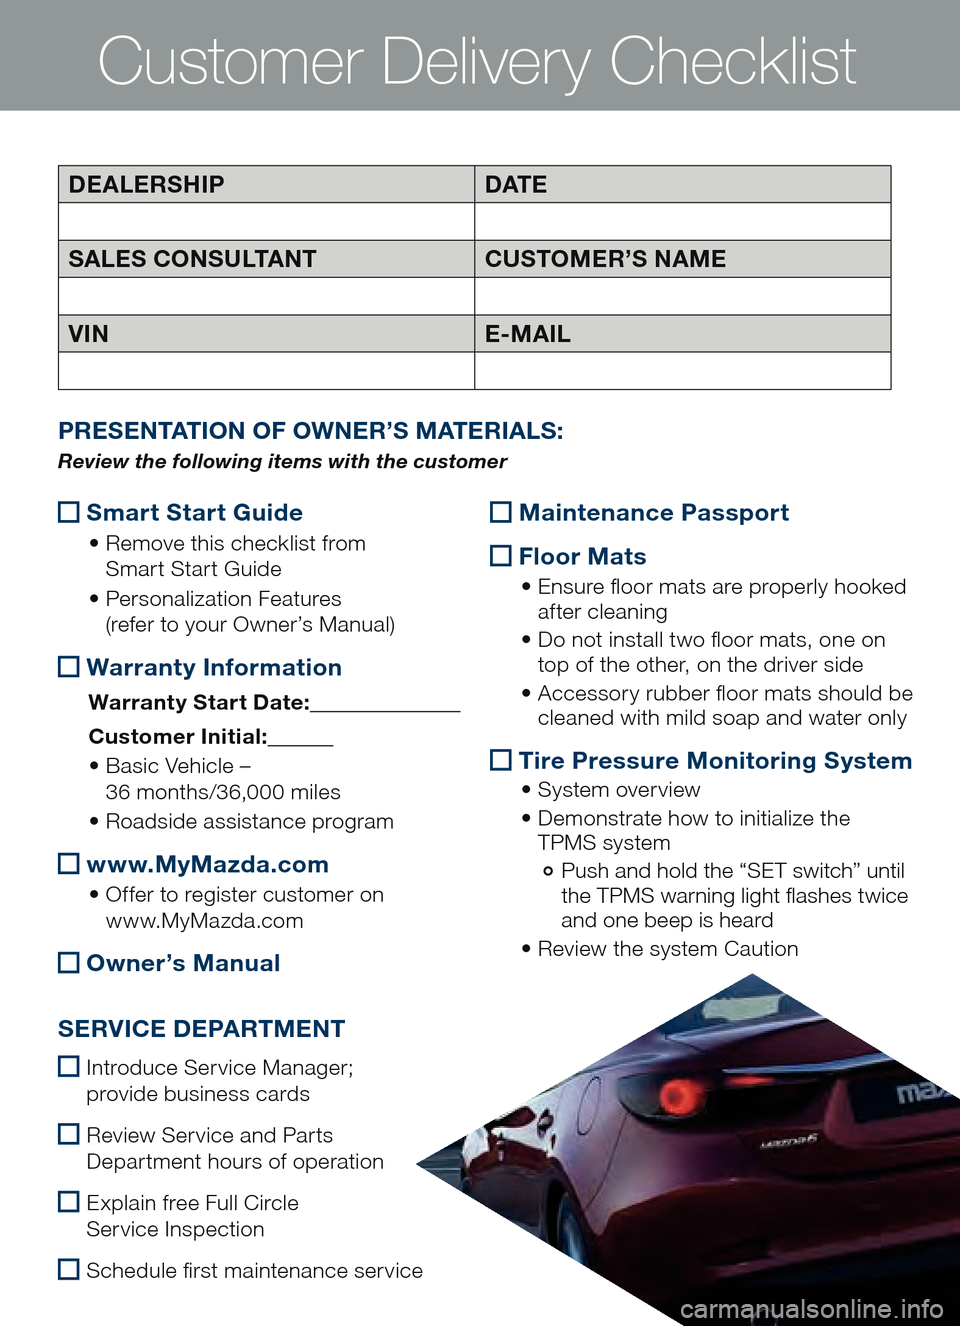 MAZDA MODEL 6 2014  Smart Start Guide (in English) Customer Delivery Checklist
 Smart Start Guide
	•
		Remove 	th is	ch ecklist 	fr om 	 
Sma rt Start Guide
	• 		Per sonalization 	Fe atures 	 
(re fer to your Owner’s Manual)
  War
ranty Informat